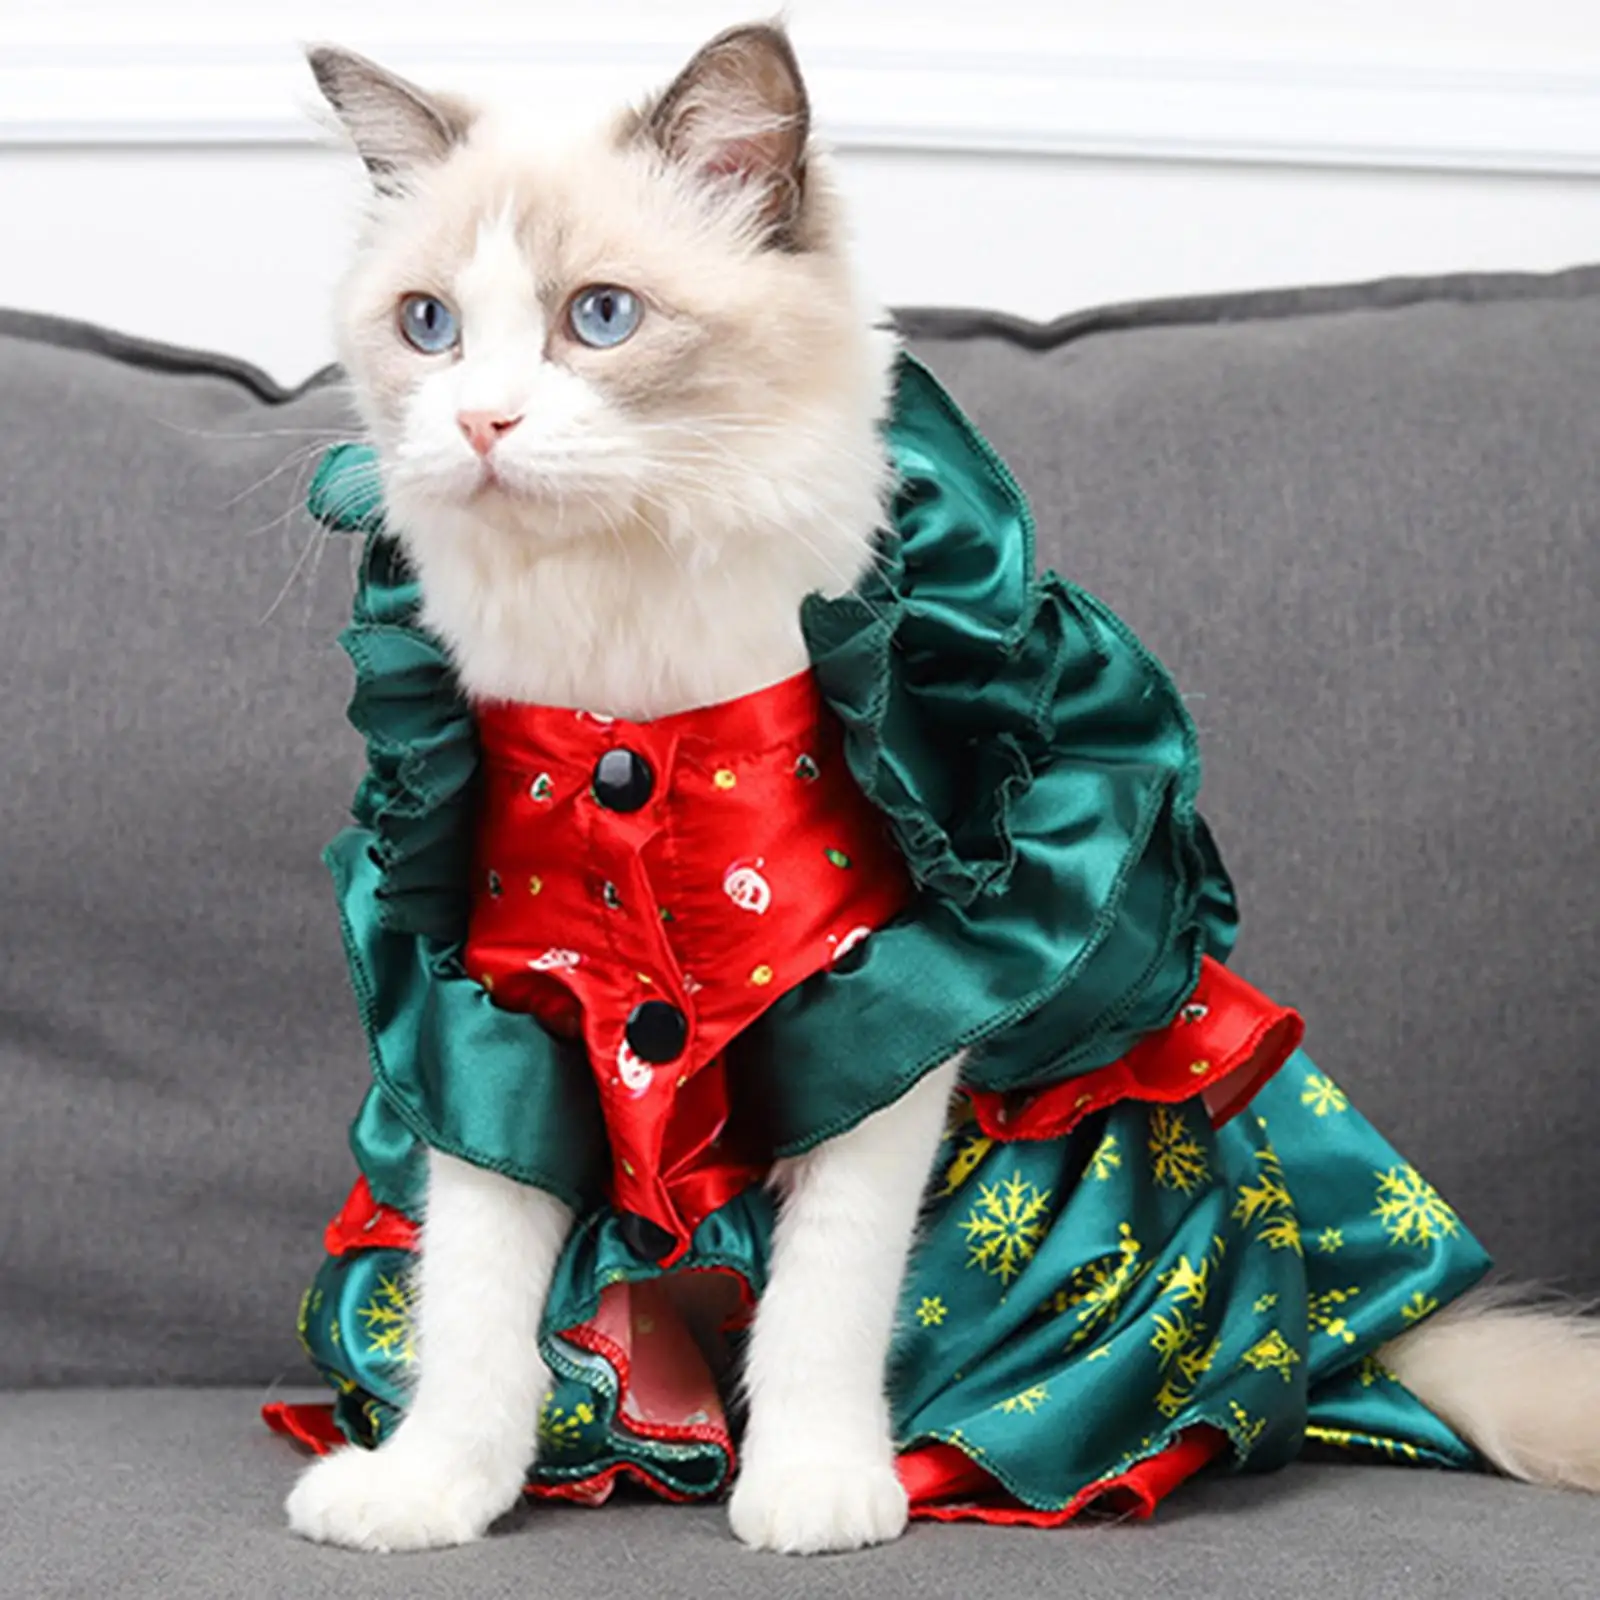 Dog Cat Christmas Costume Party Cosplay Dress Holiday Decoration Xmas Apparel Clothes Xmas Tree Costume Dress for Cats Dogs